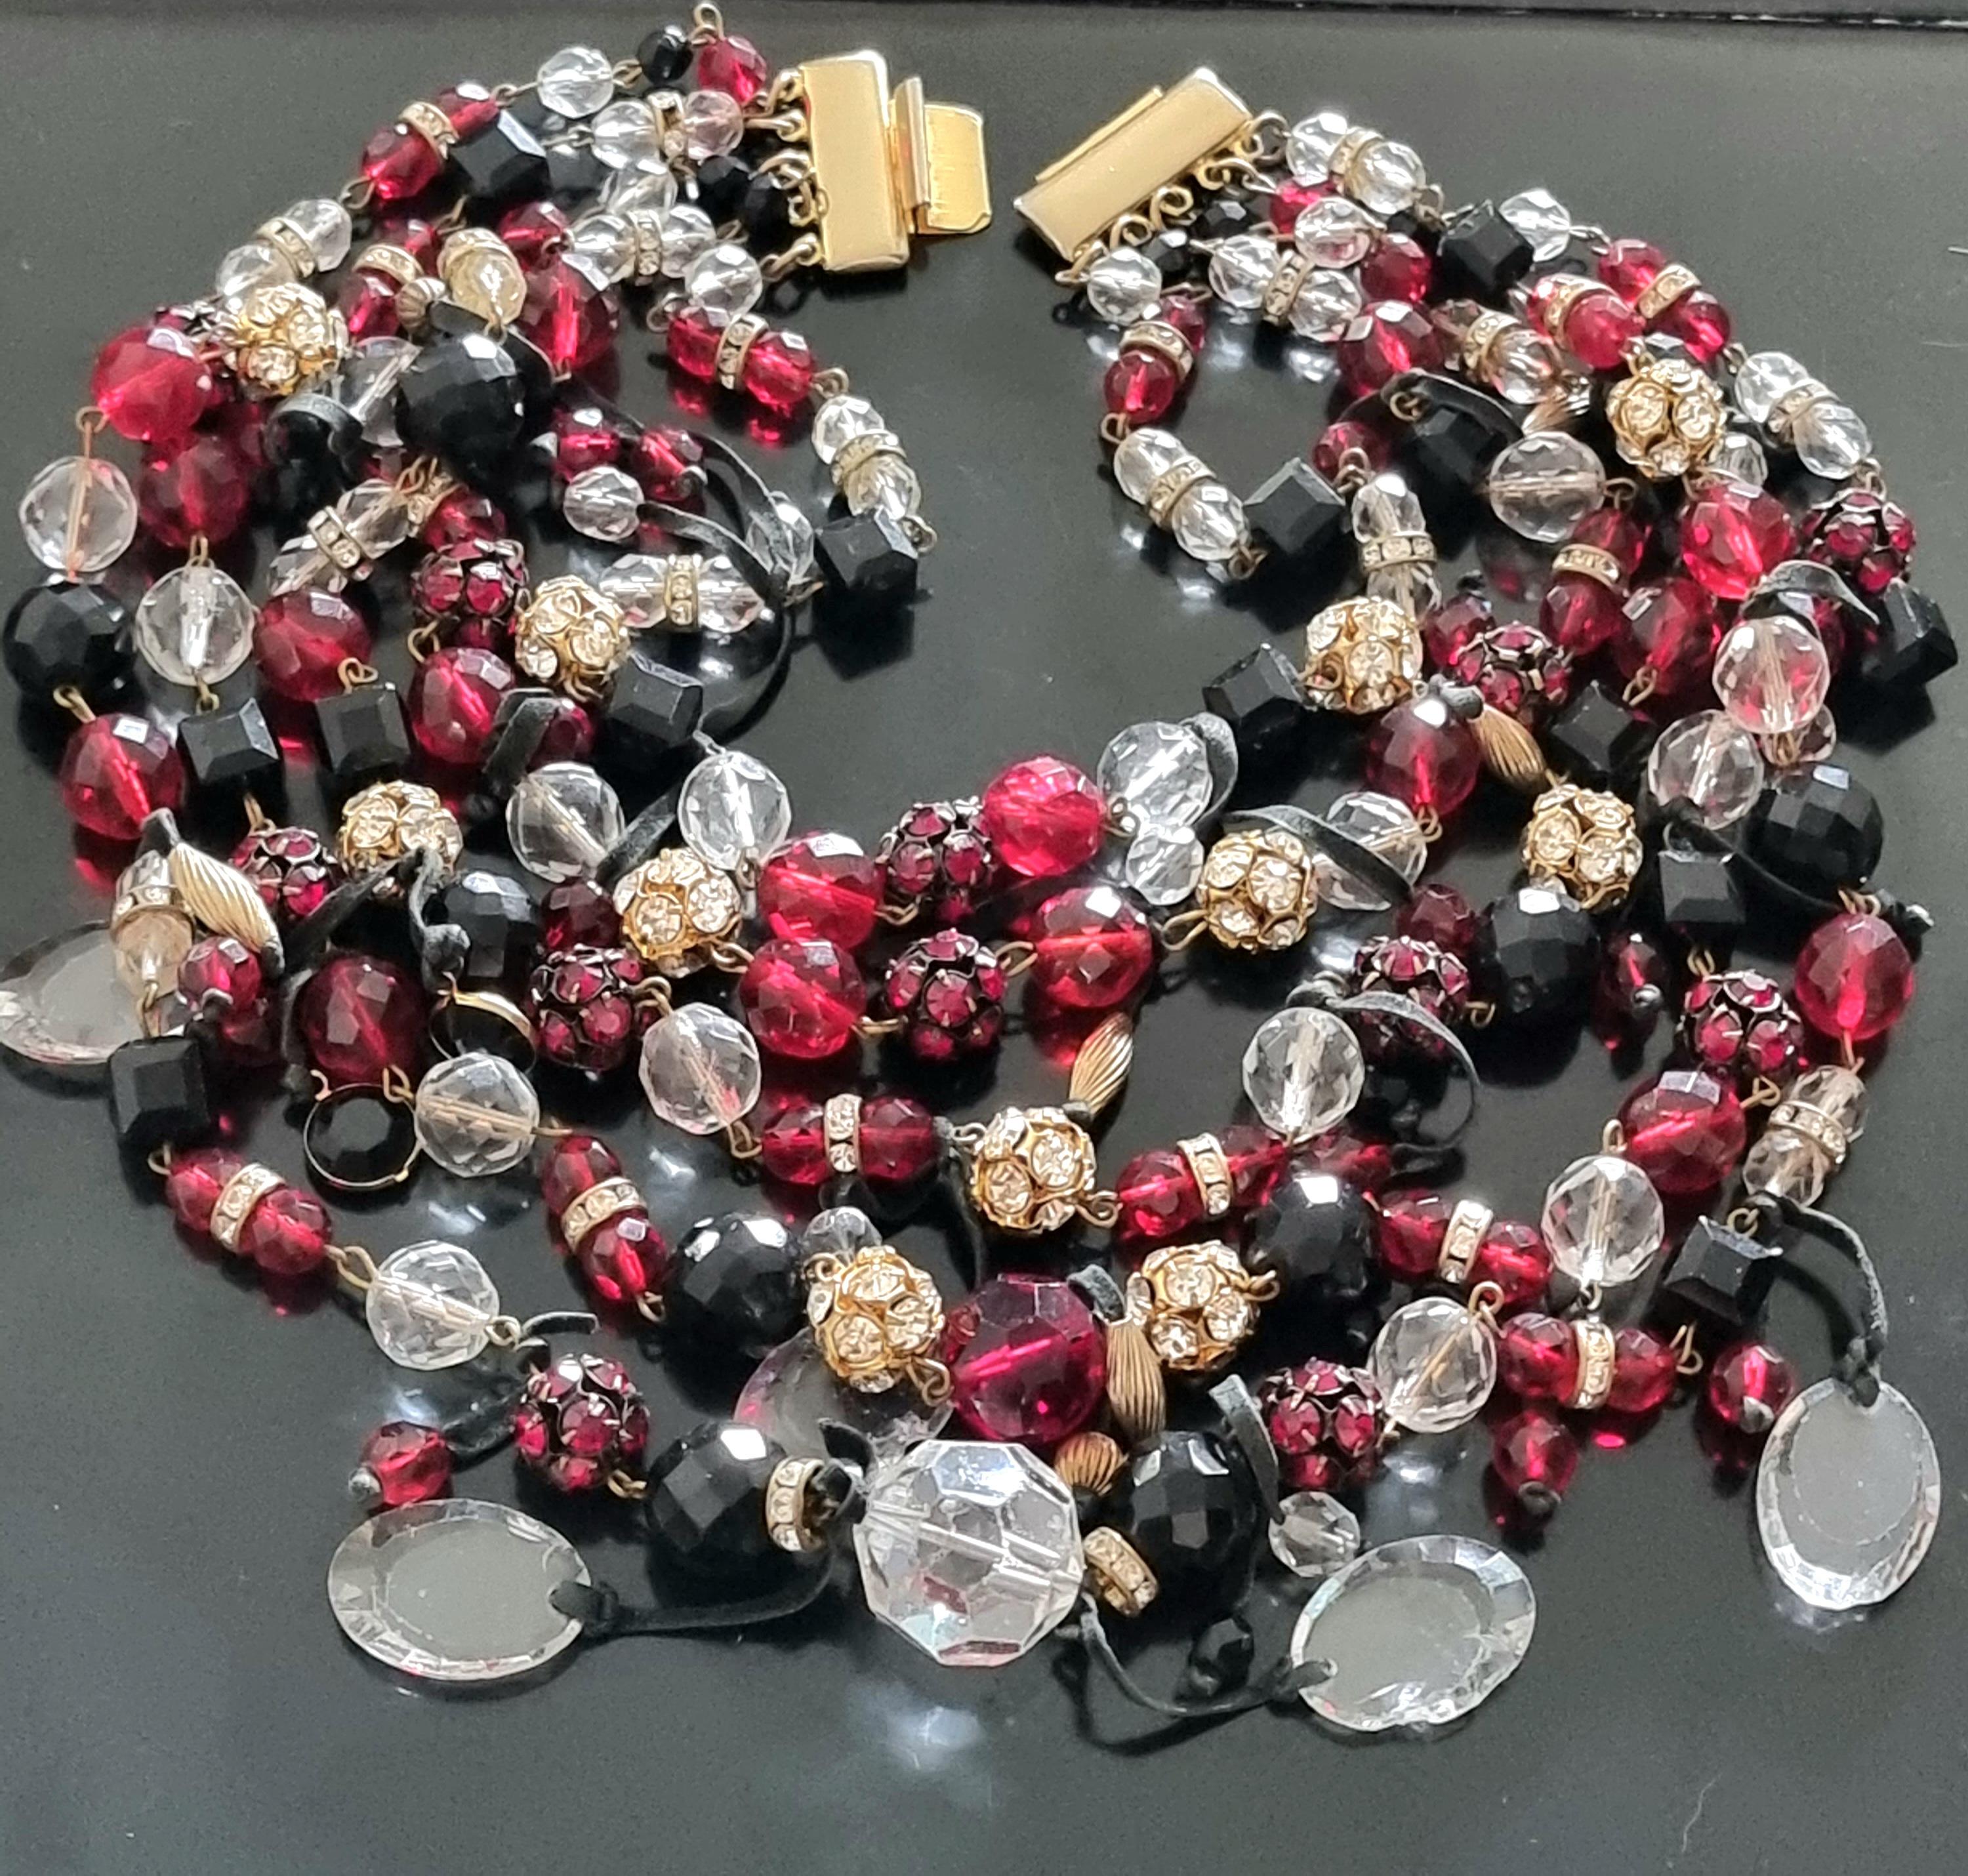 Magnificent old massive NECKLACE,
60s vintage,
glass beads, rhinestones,
exceptional quality work,
by FRANÇOISE MONTAGUE,
length of the necklace (the smallest row) 38 cm, weight 323 g,
NECKLACE is in good condition, except for the transparent oval